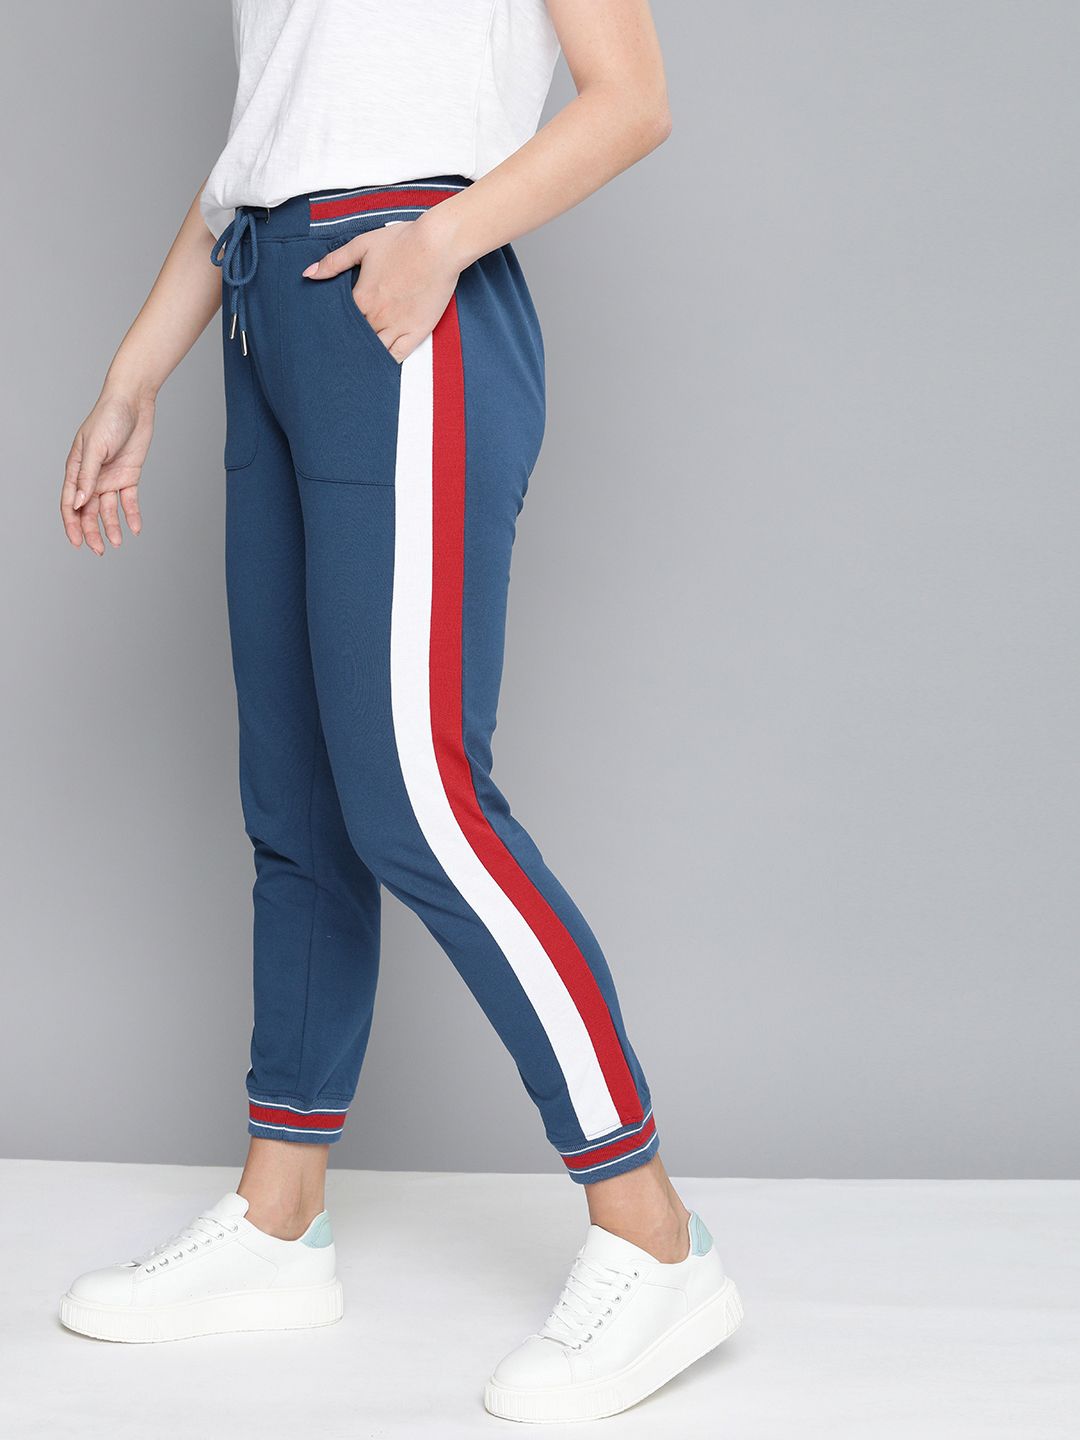 Harvard Women Teal Blue Solid Cropped Side-Striped Joggers Price in India